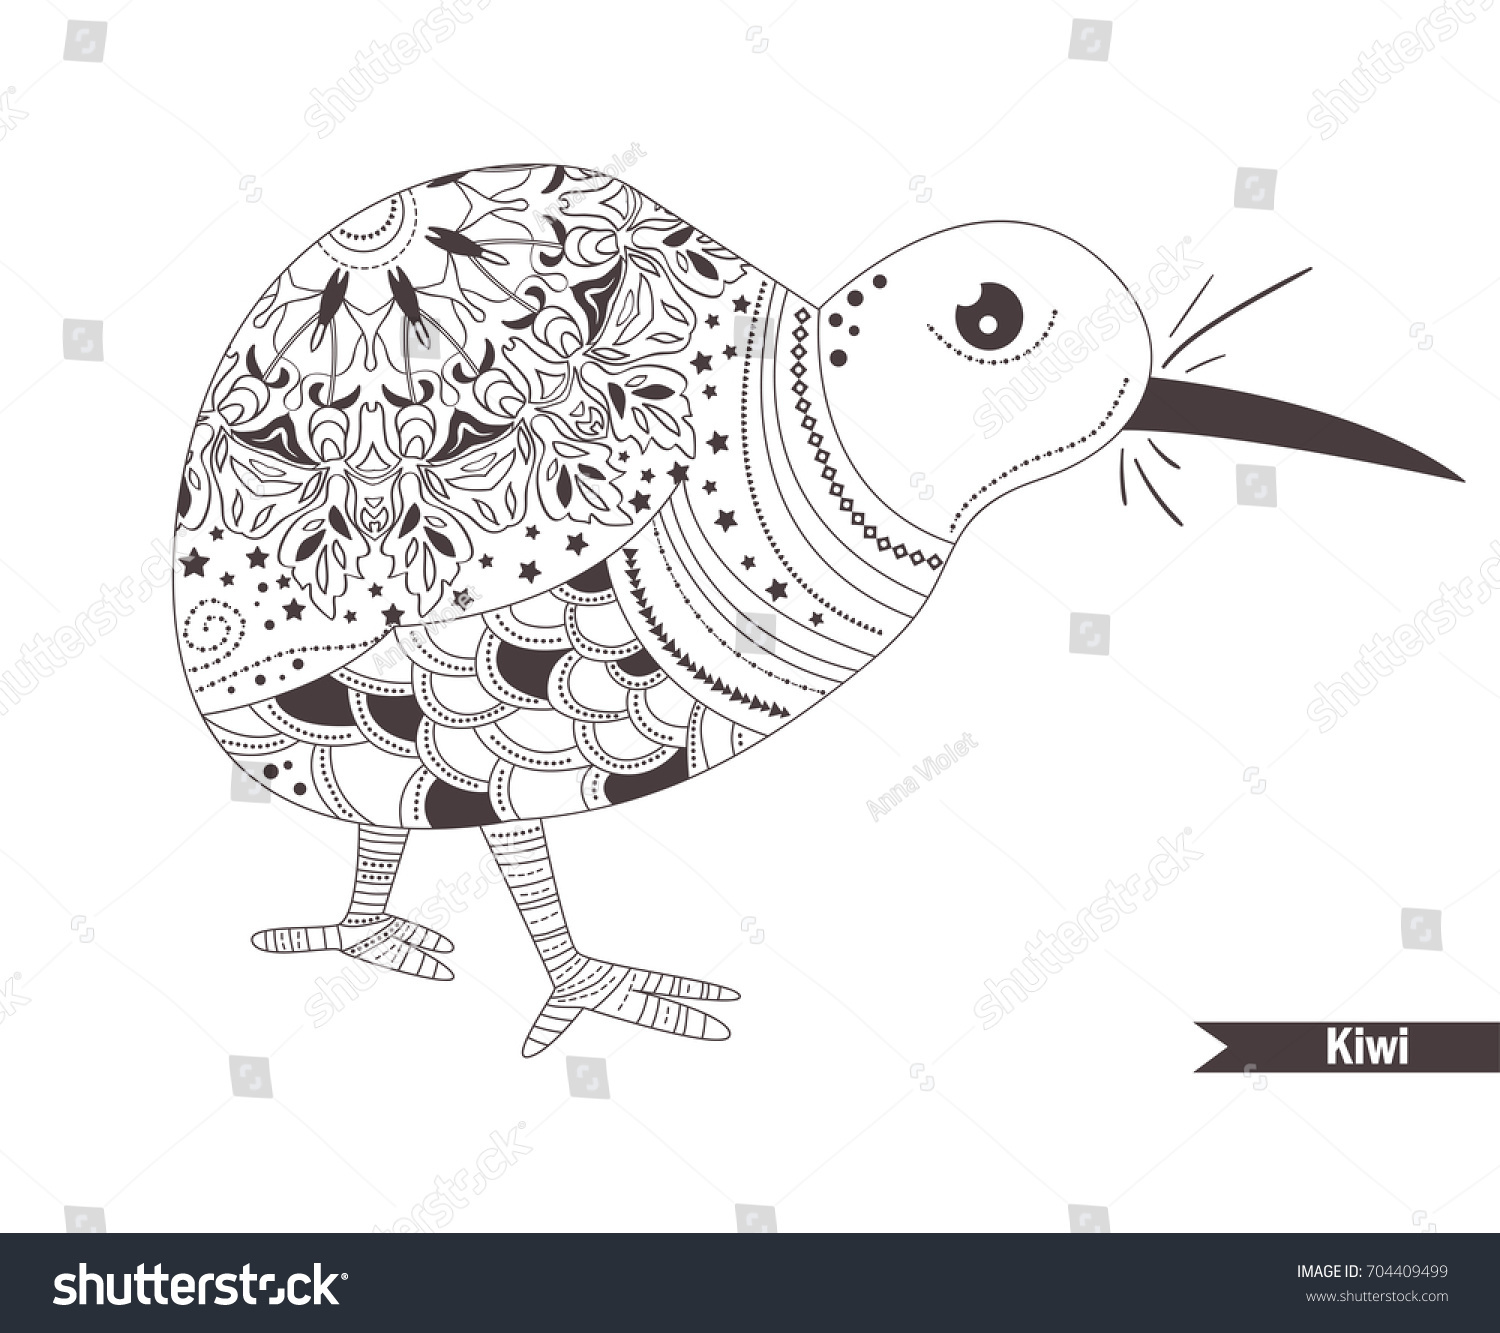 75 Top Kiwi Bird Coloring Pages  Images